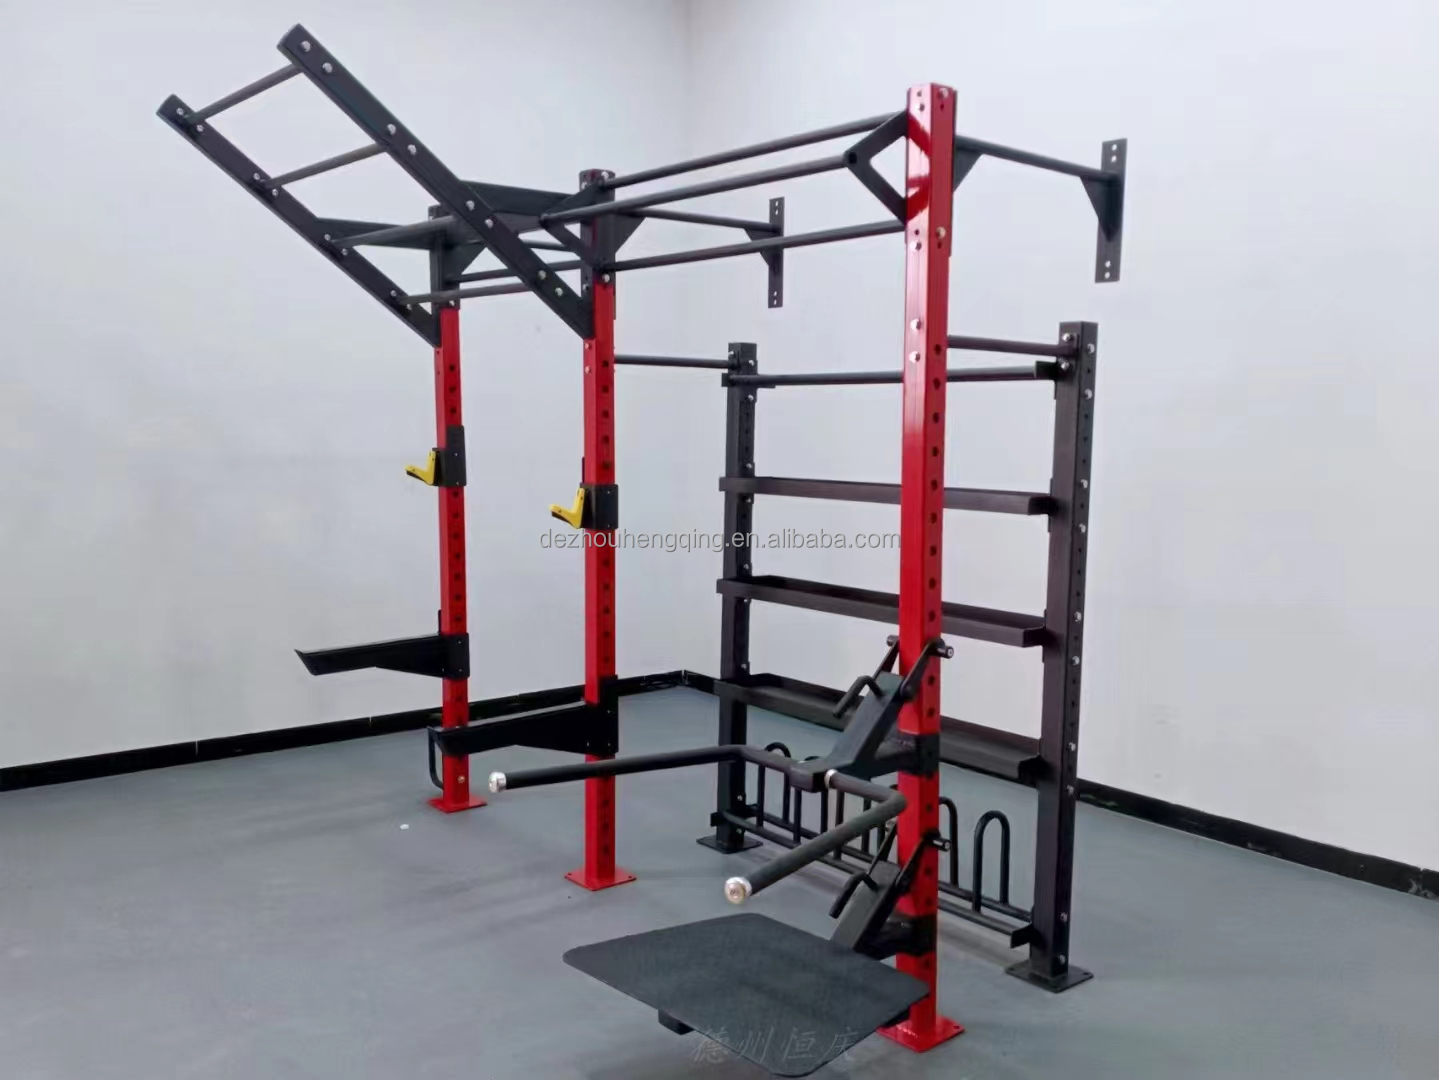 Multi Functional Gym Fitness Wall Mounted Single Free Standing Rigs CF Racks Equipment